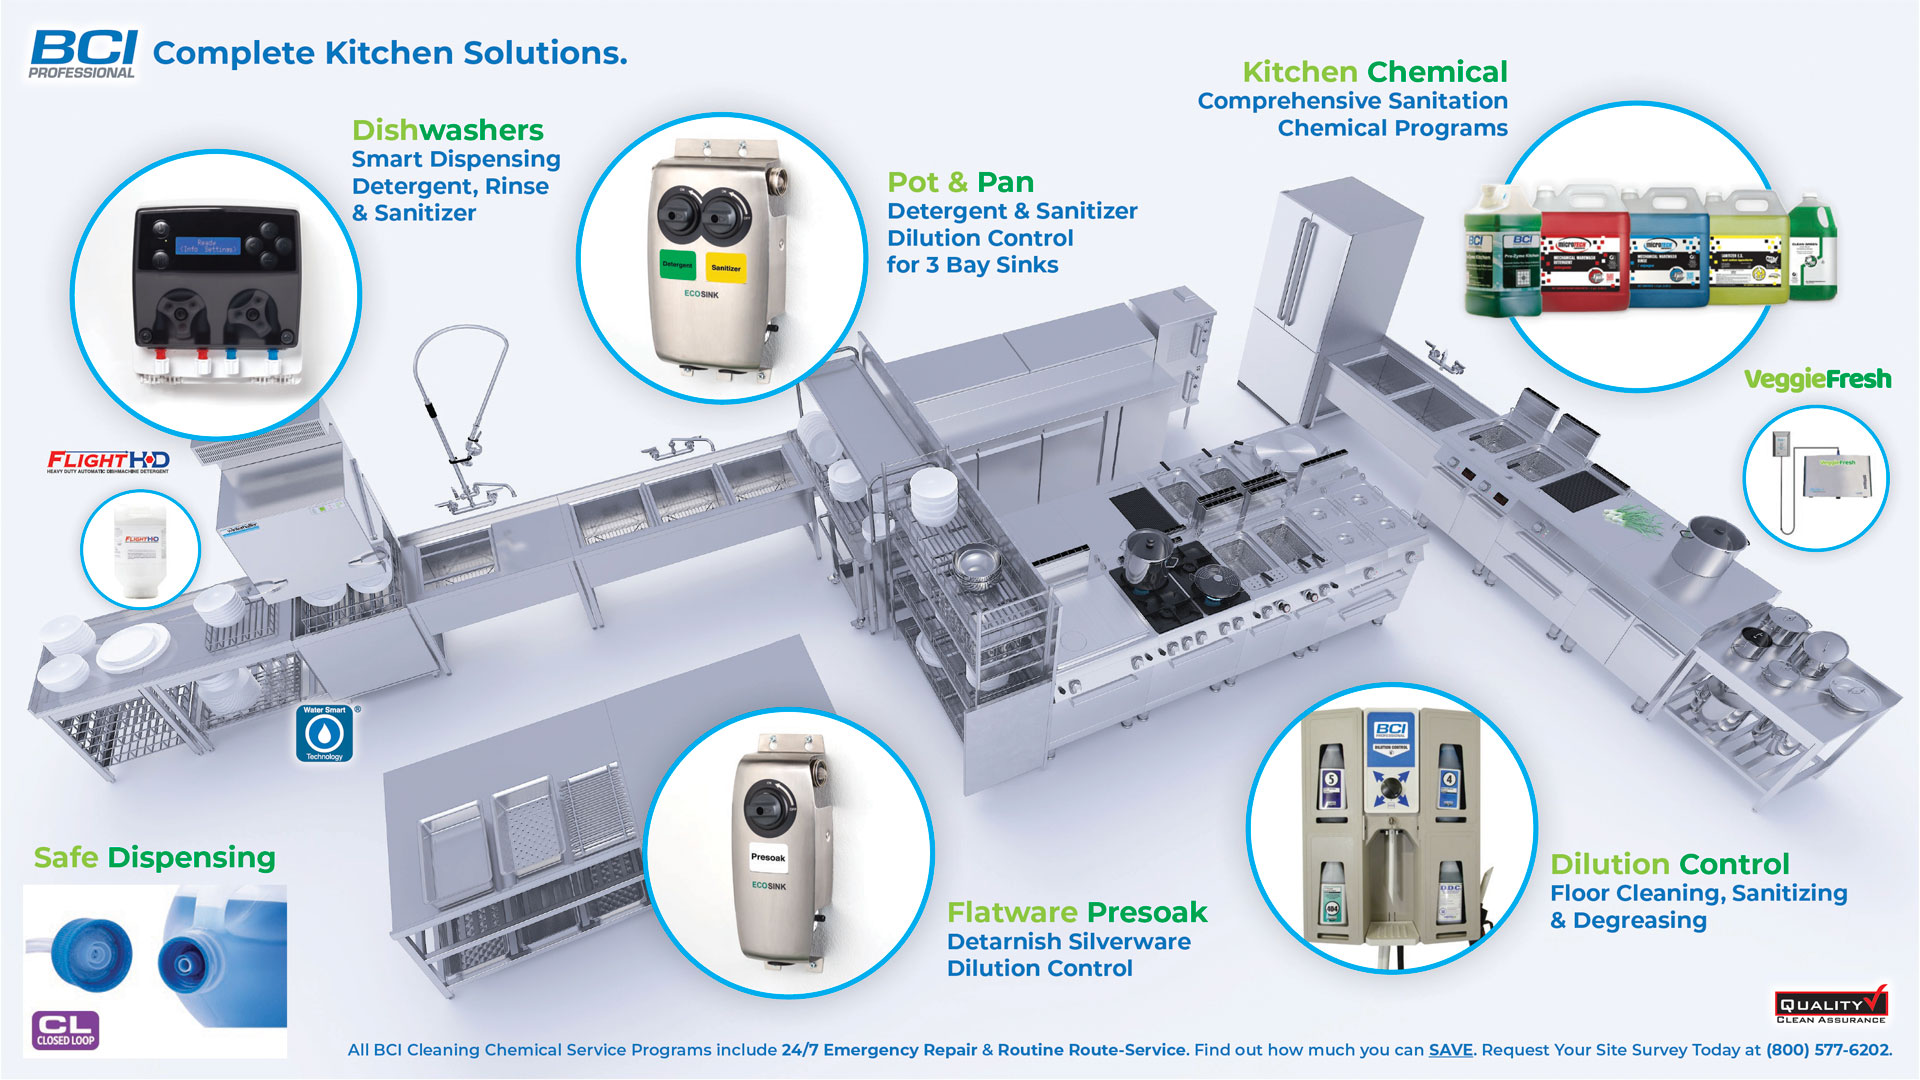 BCI Complete Kitchen Solutions